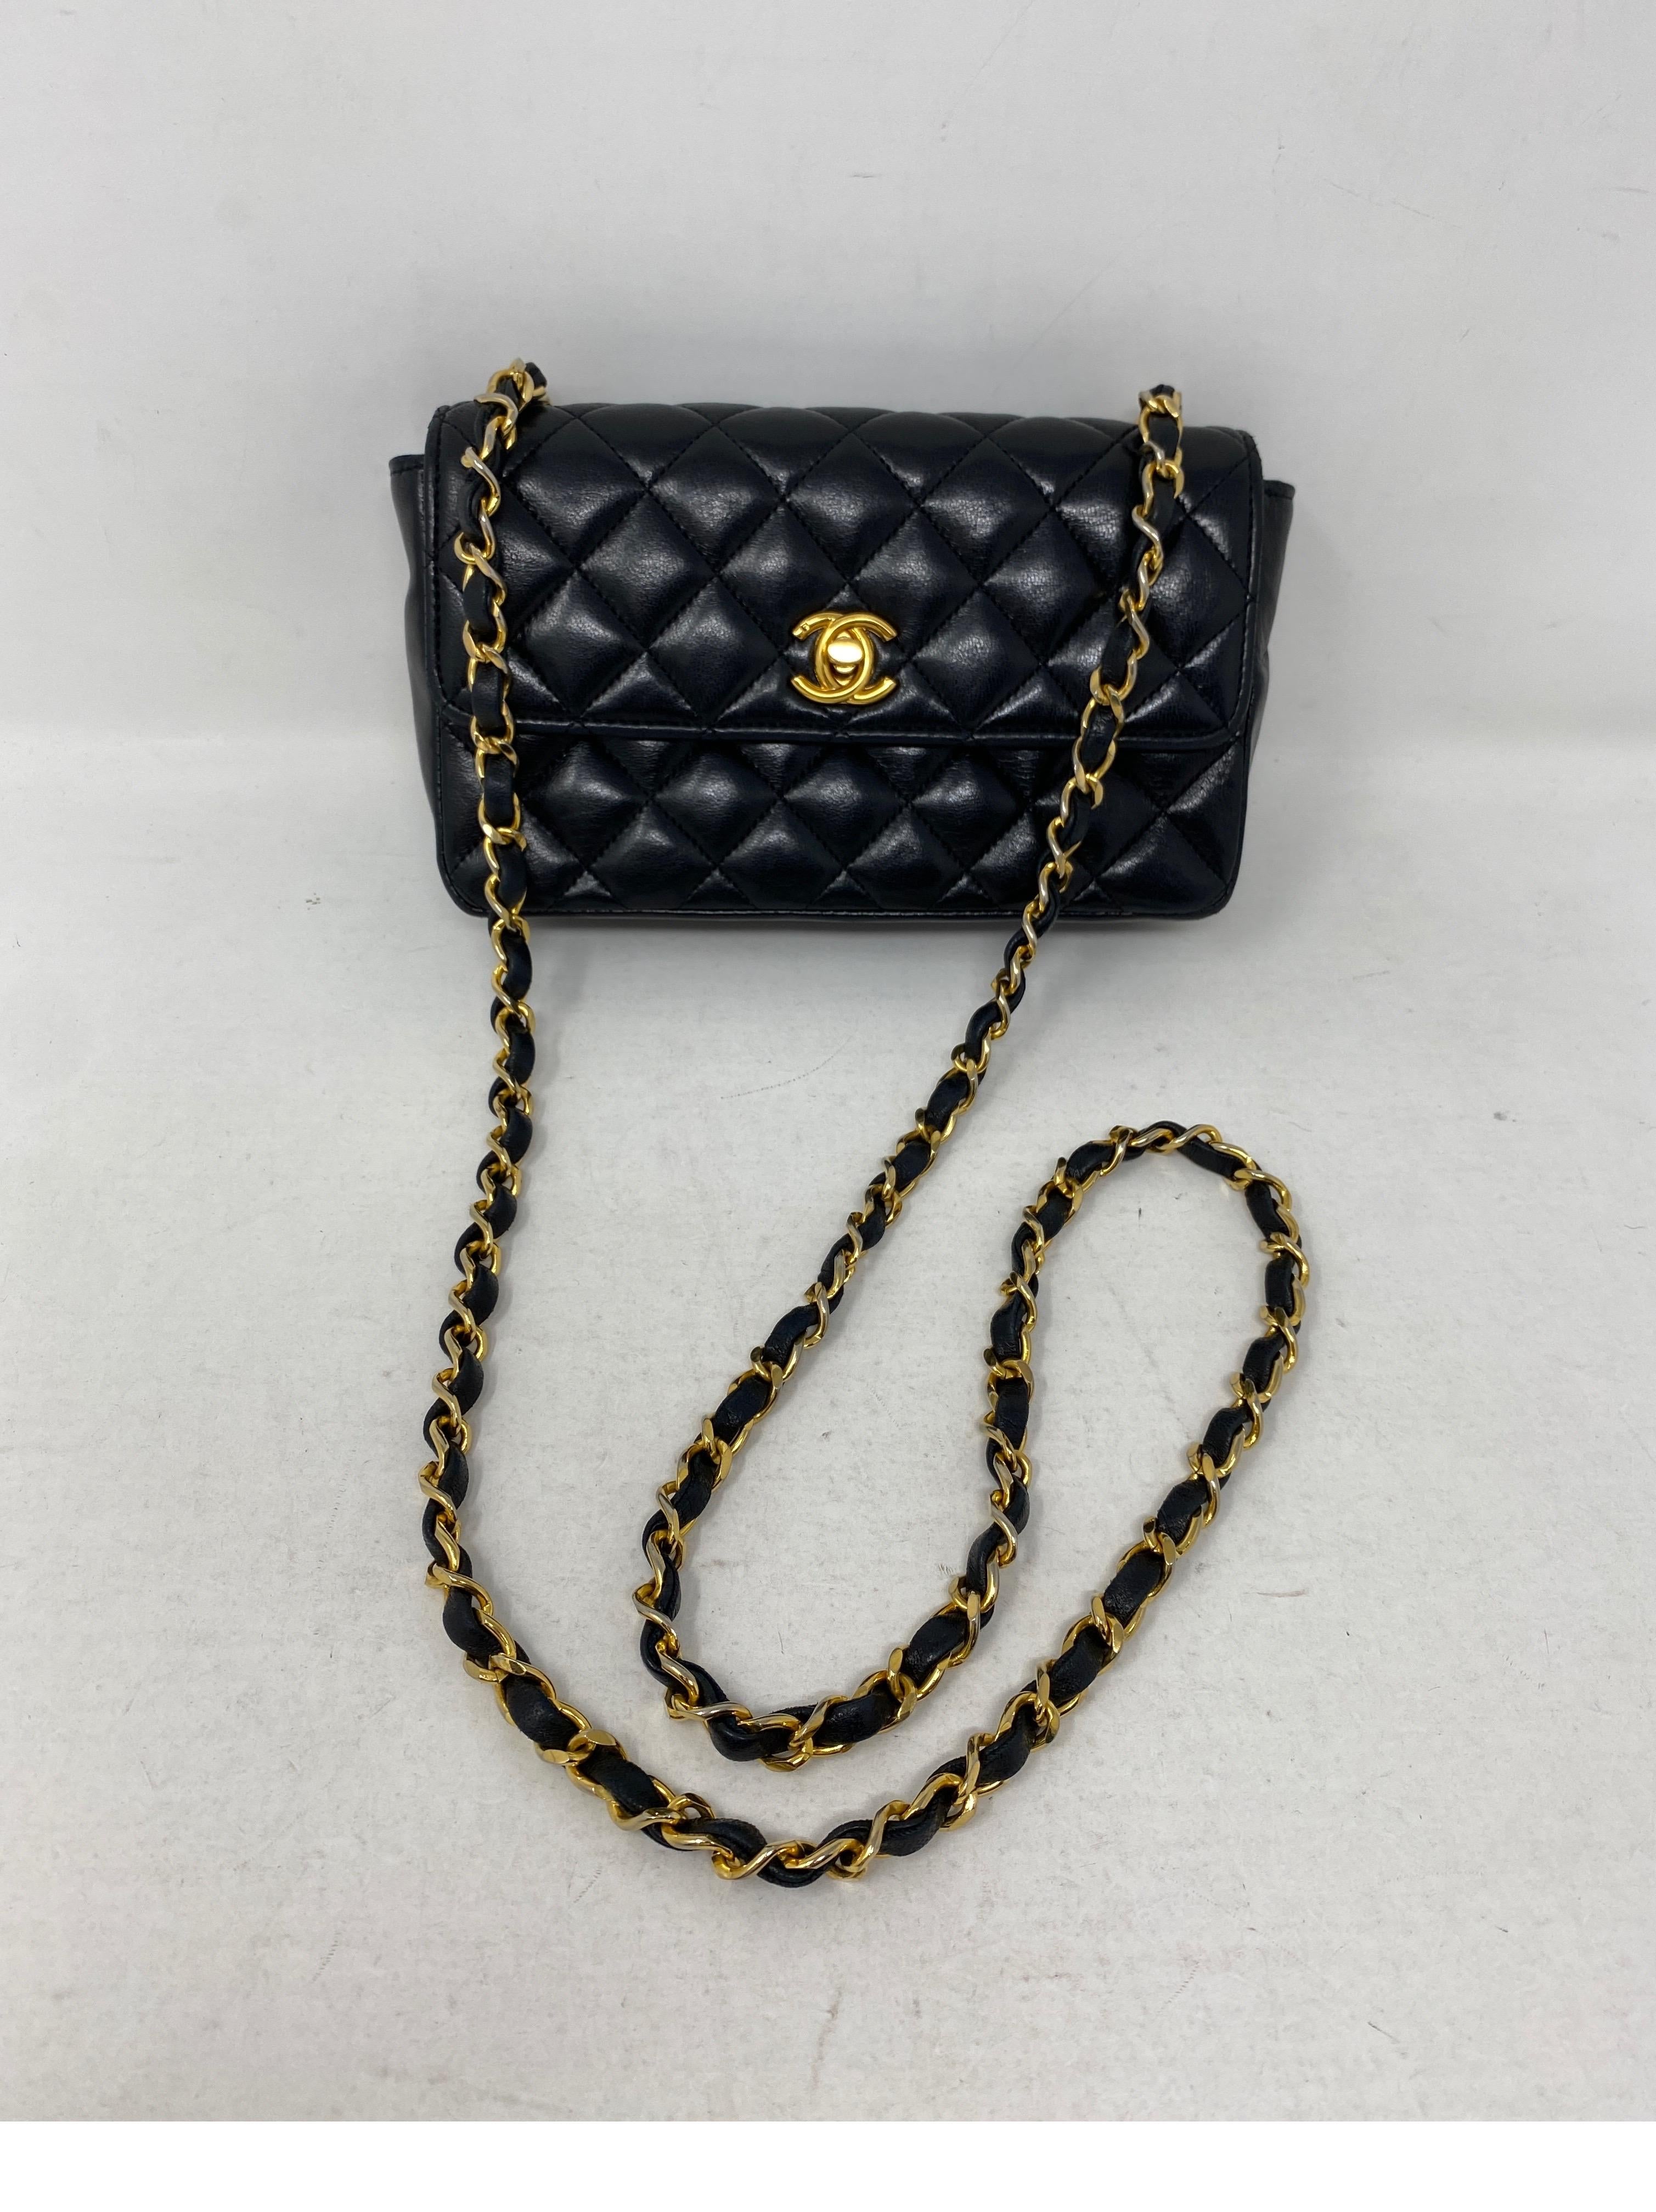 Chanel Mini Black Rectangular Bag. Lambskin black leather with gold hardware. The most sought over size bag for Chanel lovers. Vintage Chanel with gold hardware. Cell phone can fit. Strap can be doubled to wear shorter. 24 kt gold plated closure and